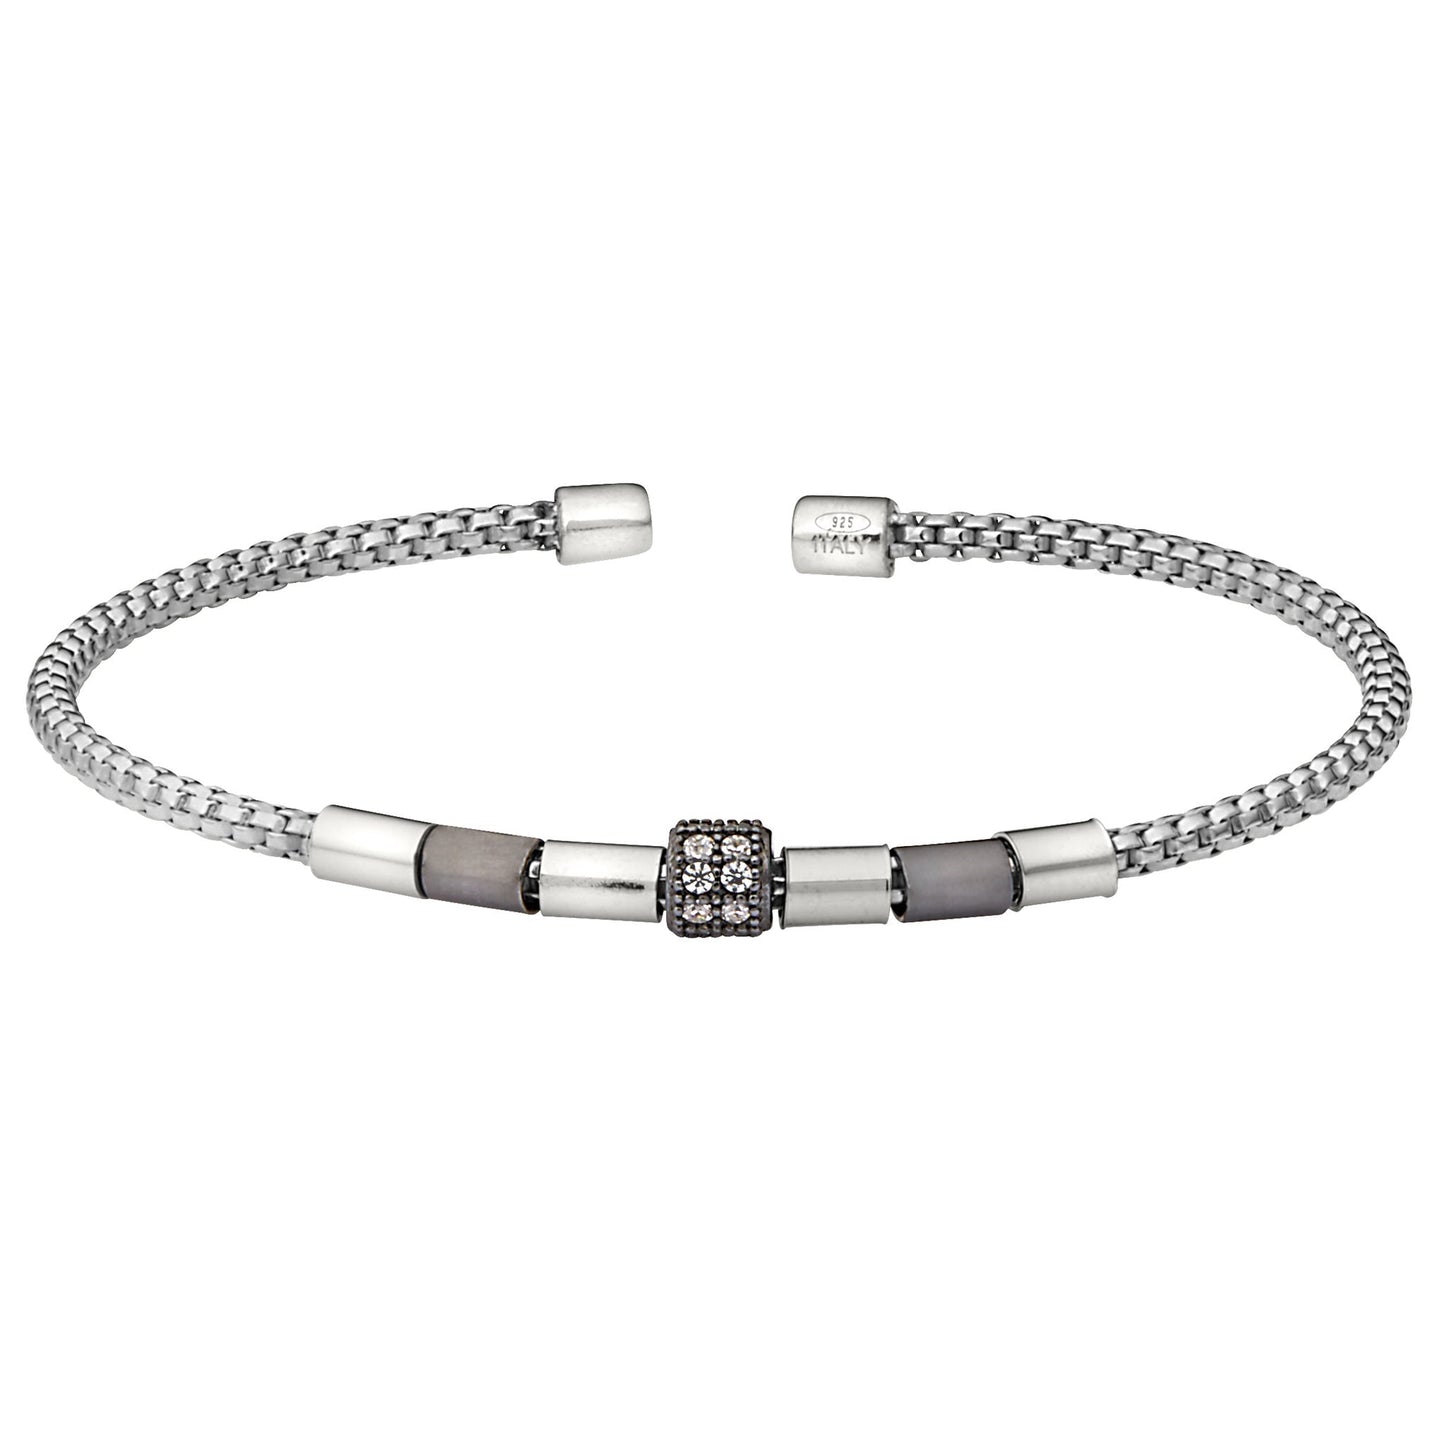 A rounded box link bracelet with black onyx beads and a simulated diamond barrel displayed on a neutral white background.